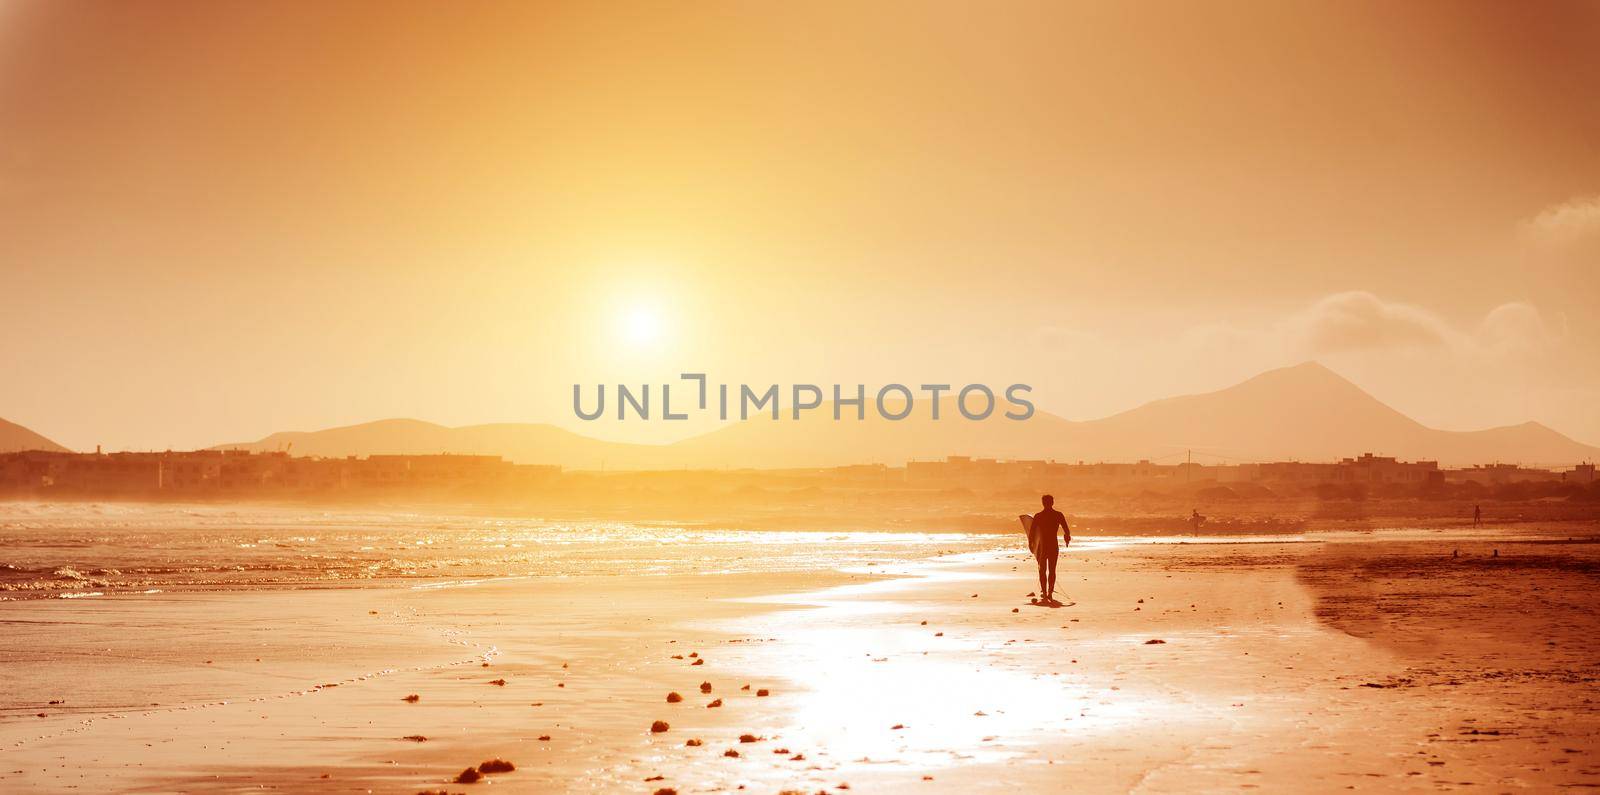 Surfer on the ocean beach at sunset on Canary Islands by tan4ikk1